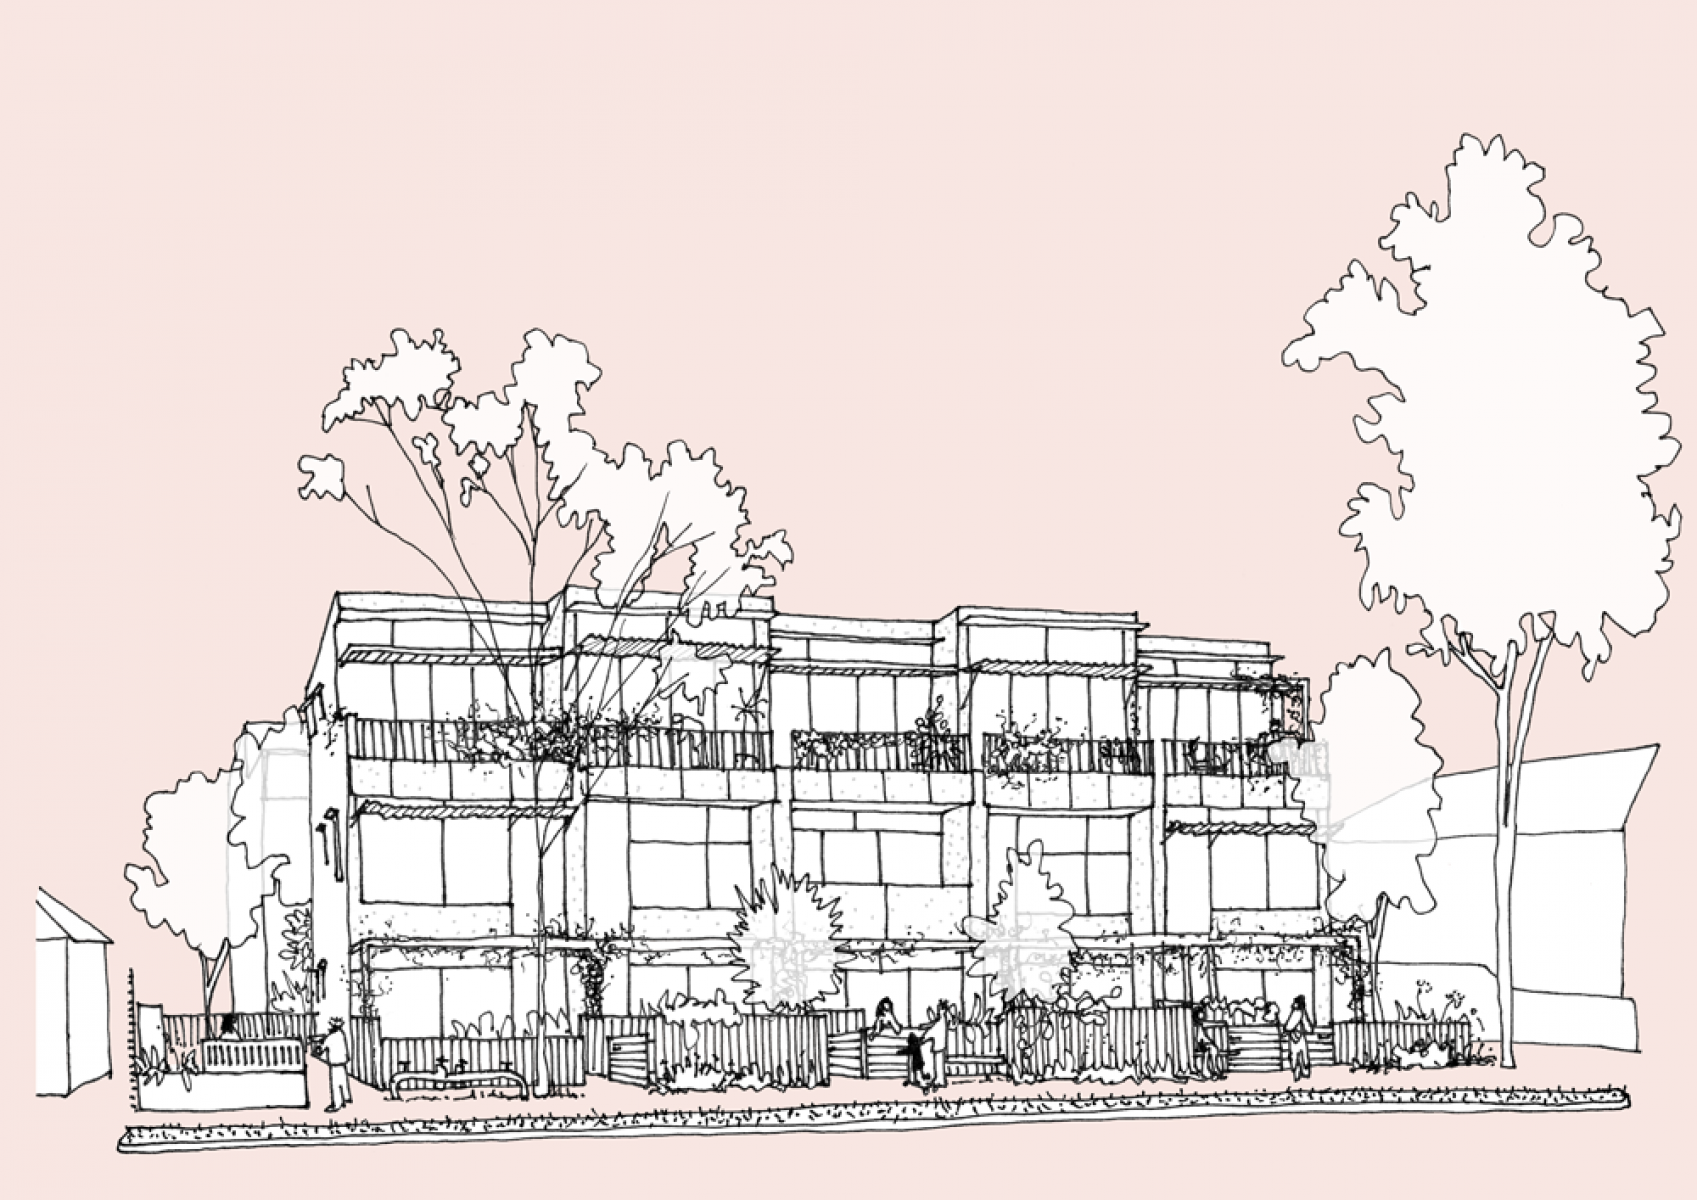 Streetview sketch (subtitle: Sketch by BoardGrove Architects)